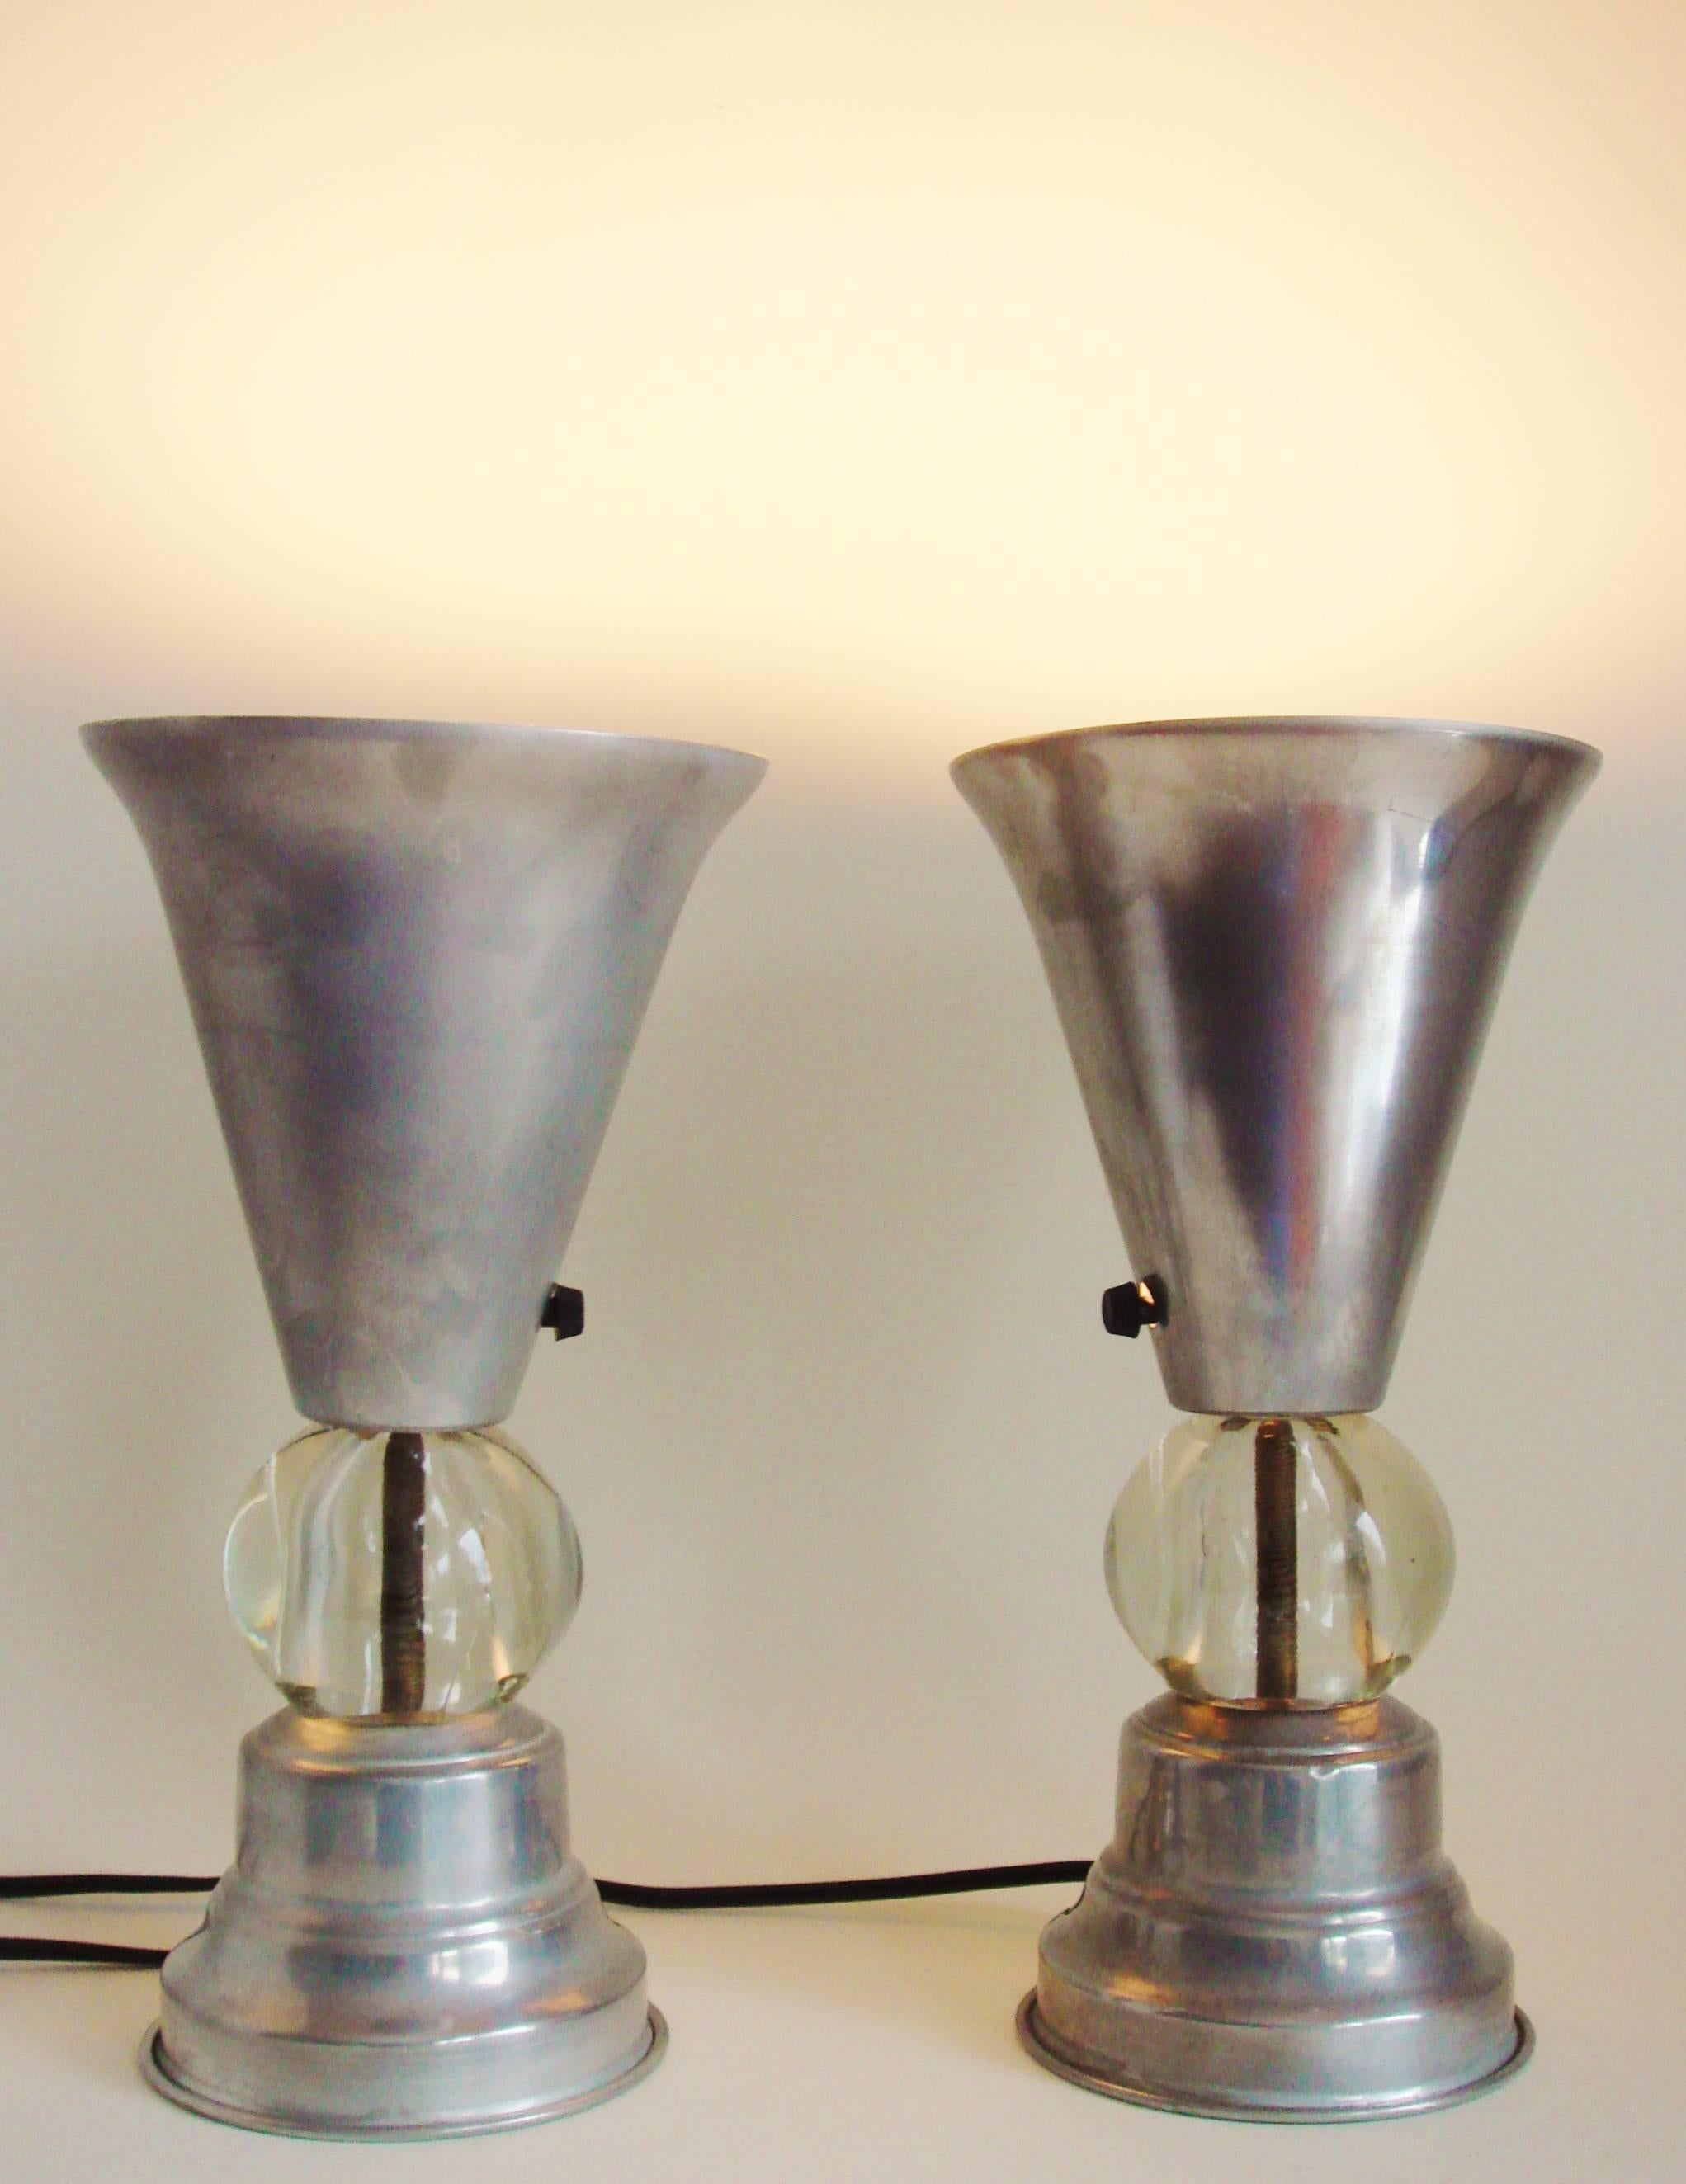 Mid-20th Century Pair of American Art Deco/Machine Age Aluminum and Glass Tabletop Torchieres For Sale